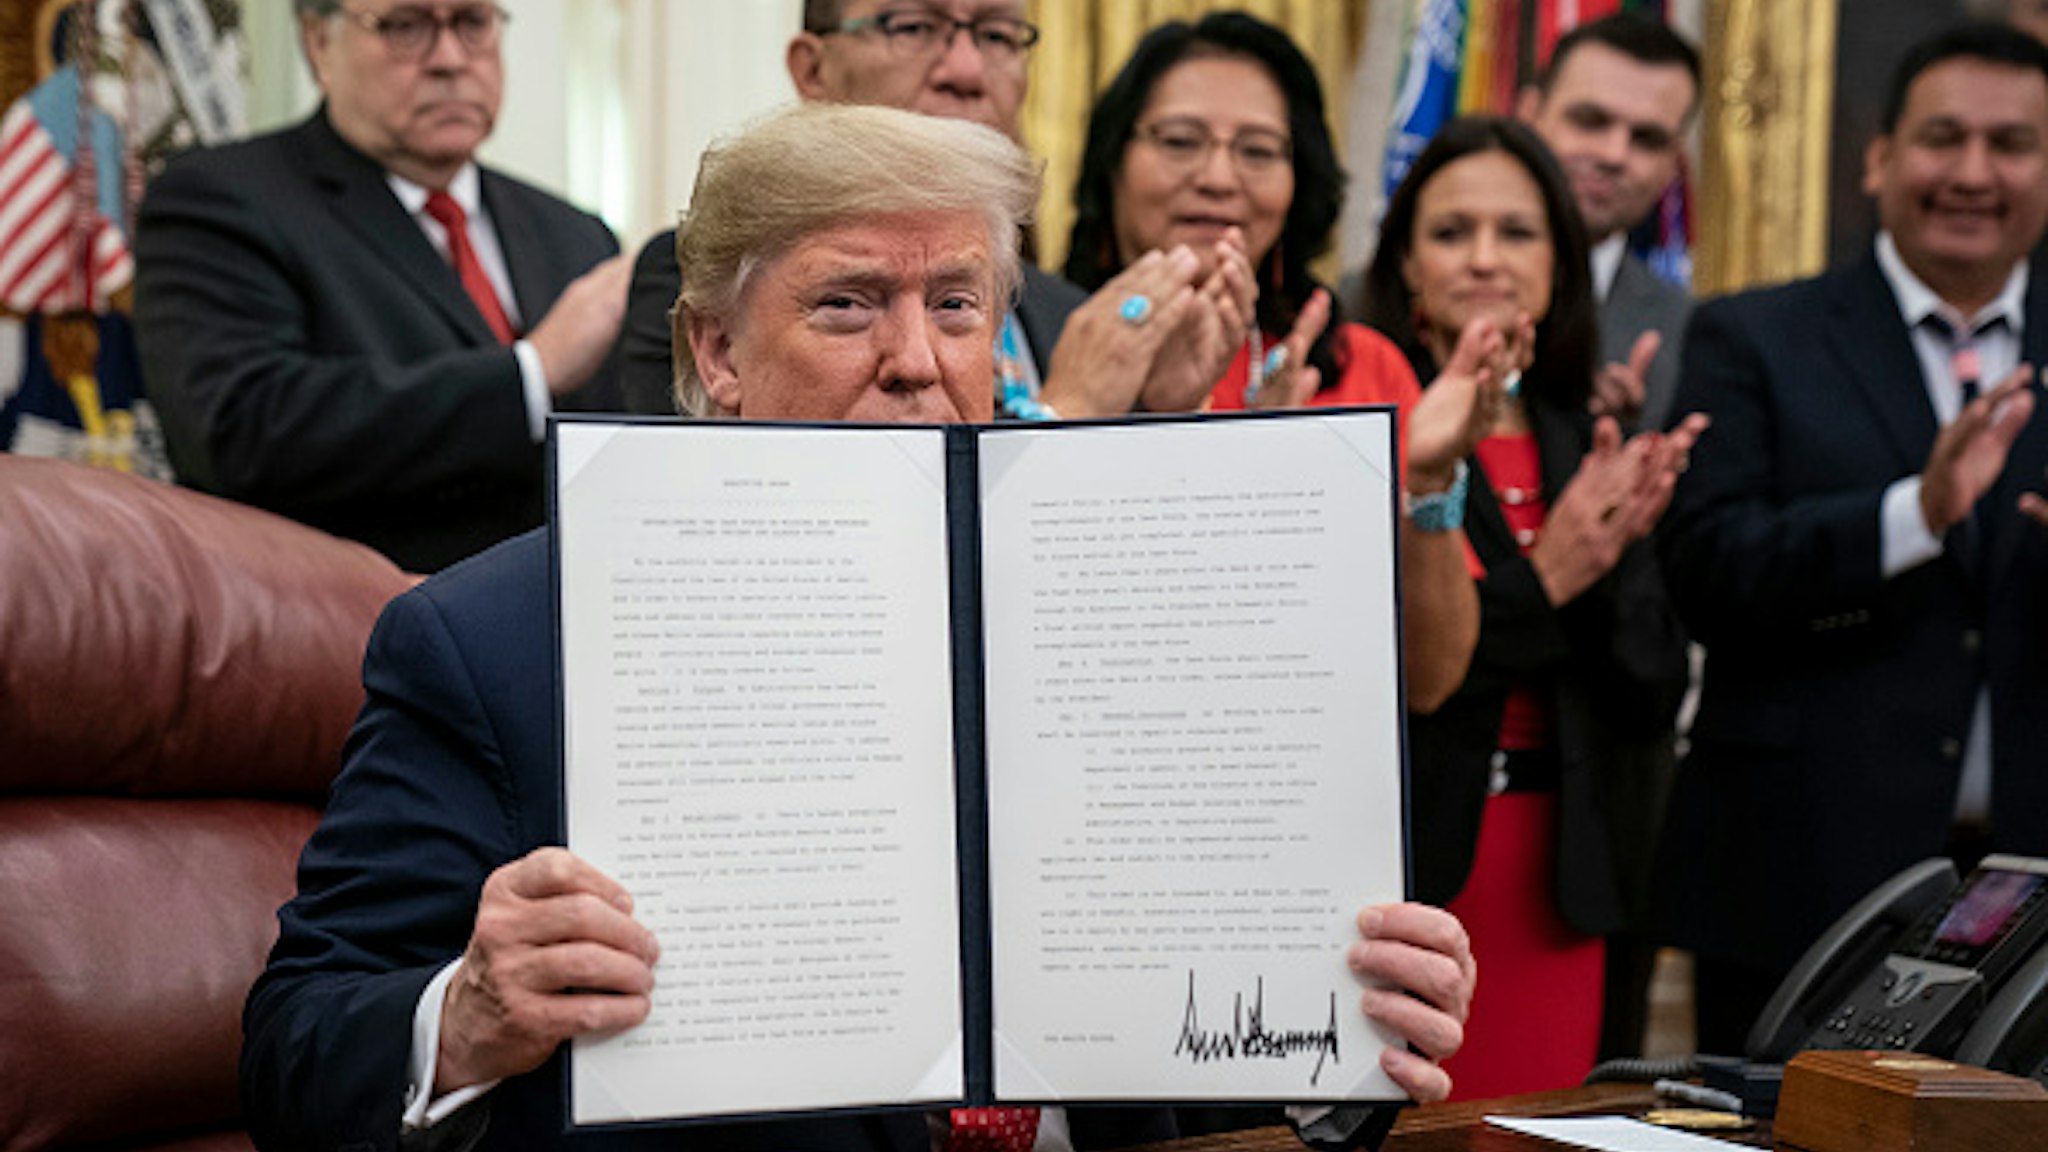 WASHINGTON, DC - NOVEMBER 26: U.S. President Donald Trump displays a signed copy of an executive order establishing the Task Force on Missing and Murdered American Indians and Alaska Natives, in the Oval Office of the White House on November 26, 2019 in Washington, DC. Attorney General William Barr recently announced the initiative on a trip to Montana where he met with Confederated Salish Kootenai Tribe leaders.